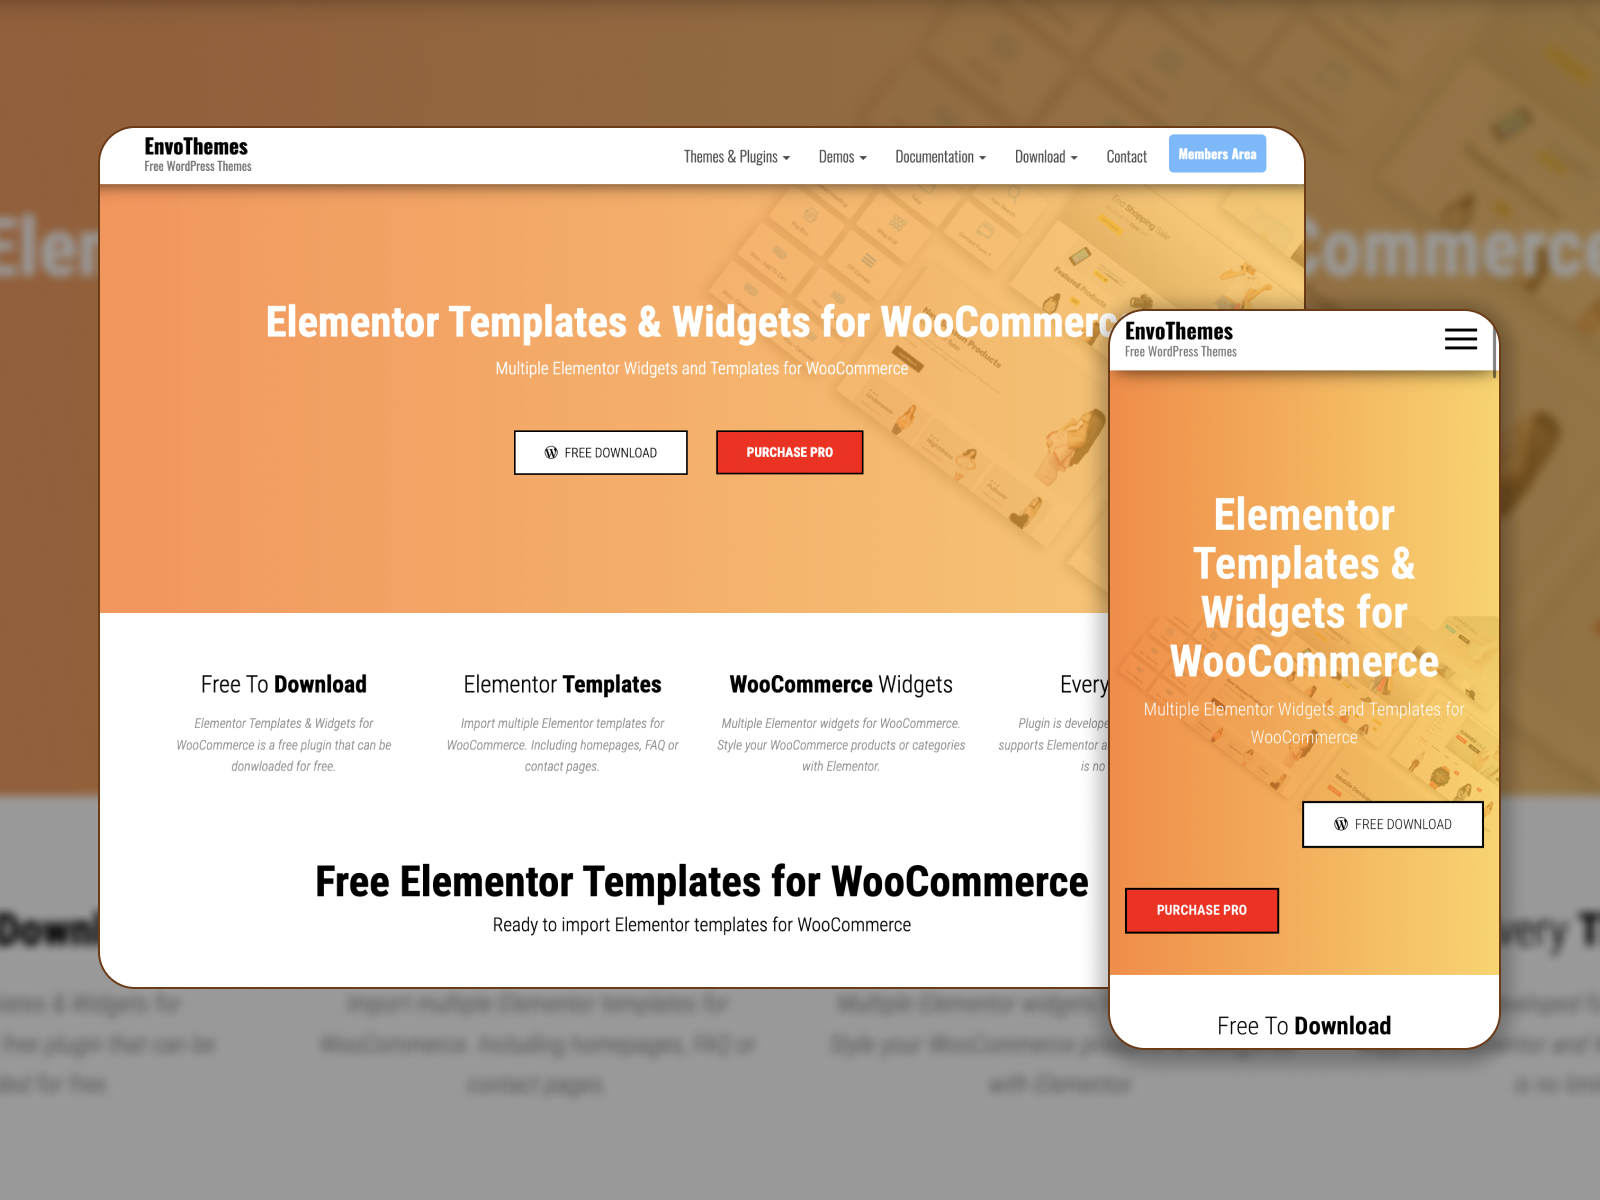 The landing page of the Envo themes for Elementor ecommerce designs.